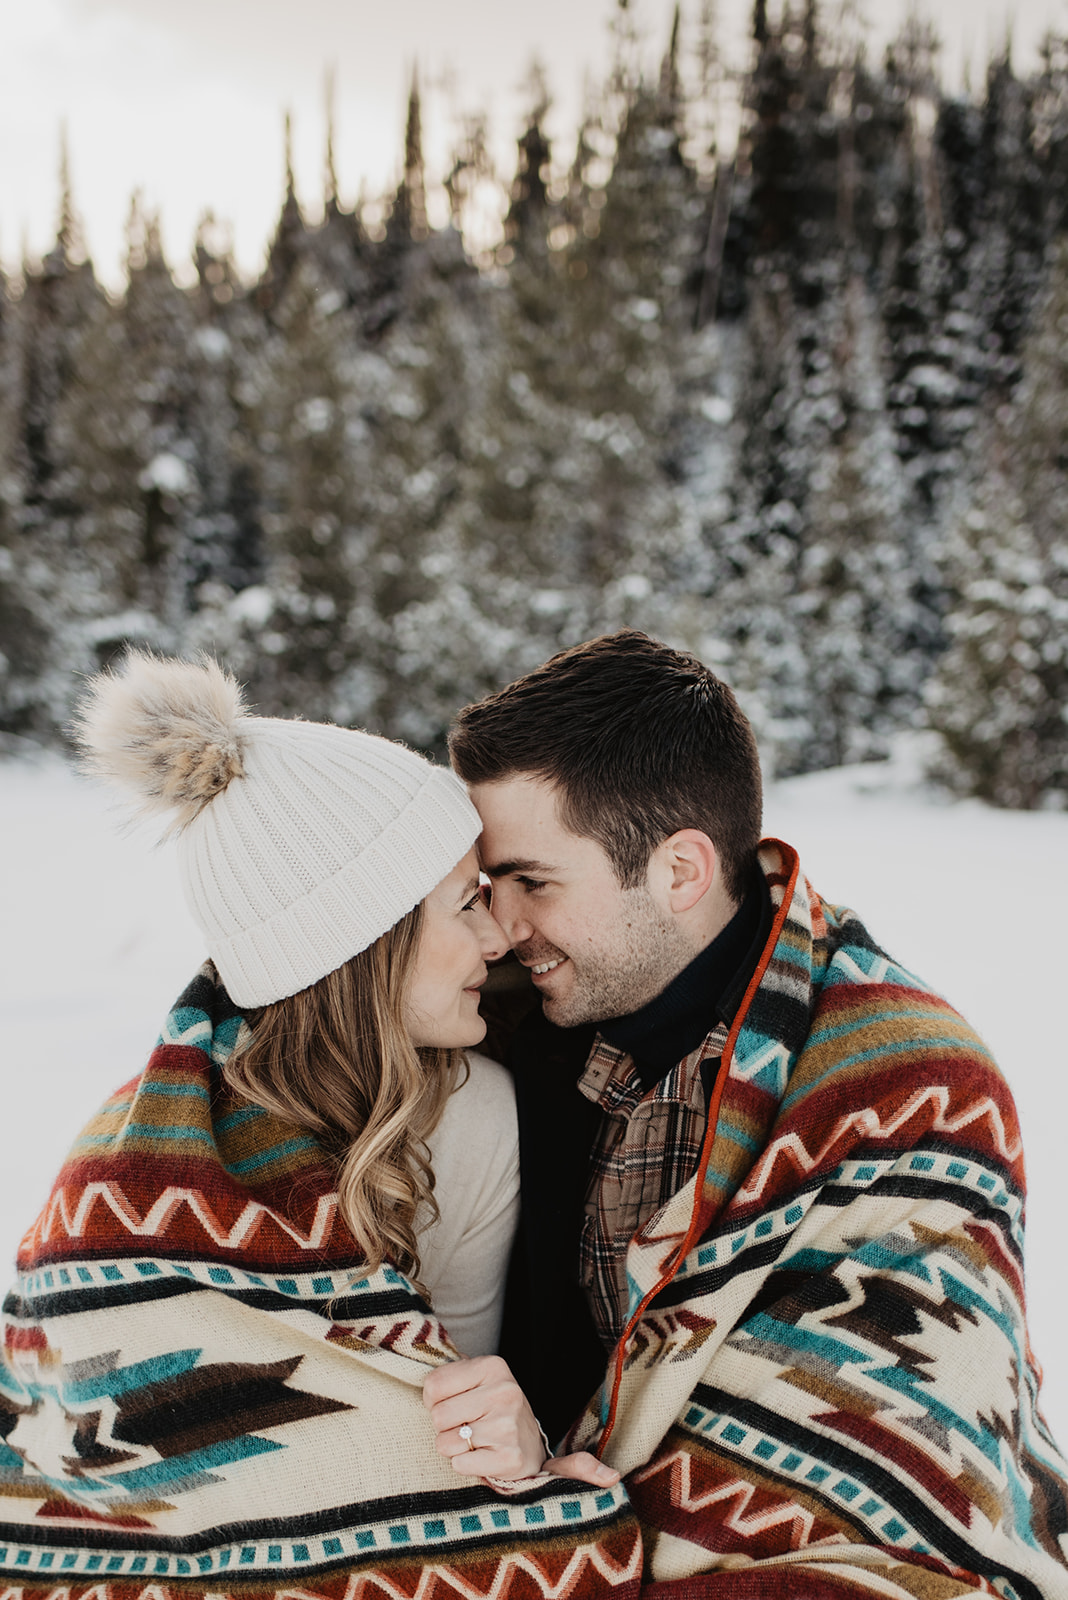 Jackson Hole winter engagement session with man and woman snuggling together in a tribal print wool blanket in the snow with big pine trees behind them